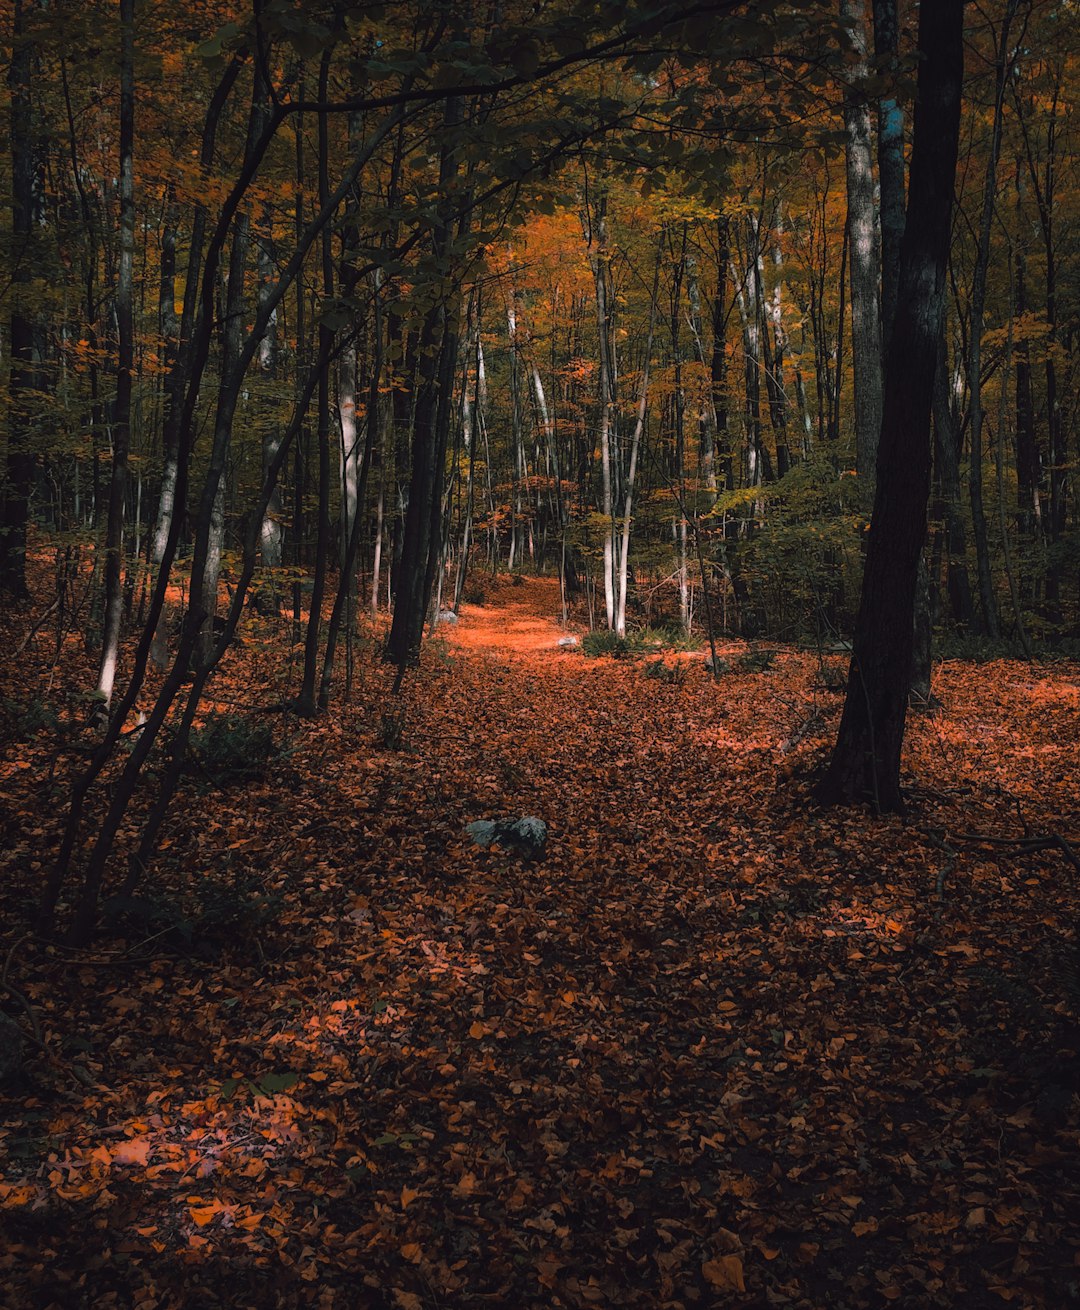 brown leaves on ground with trees